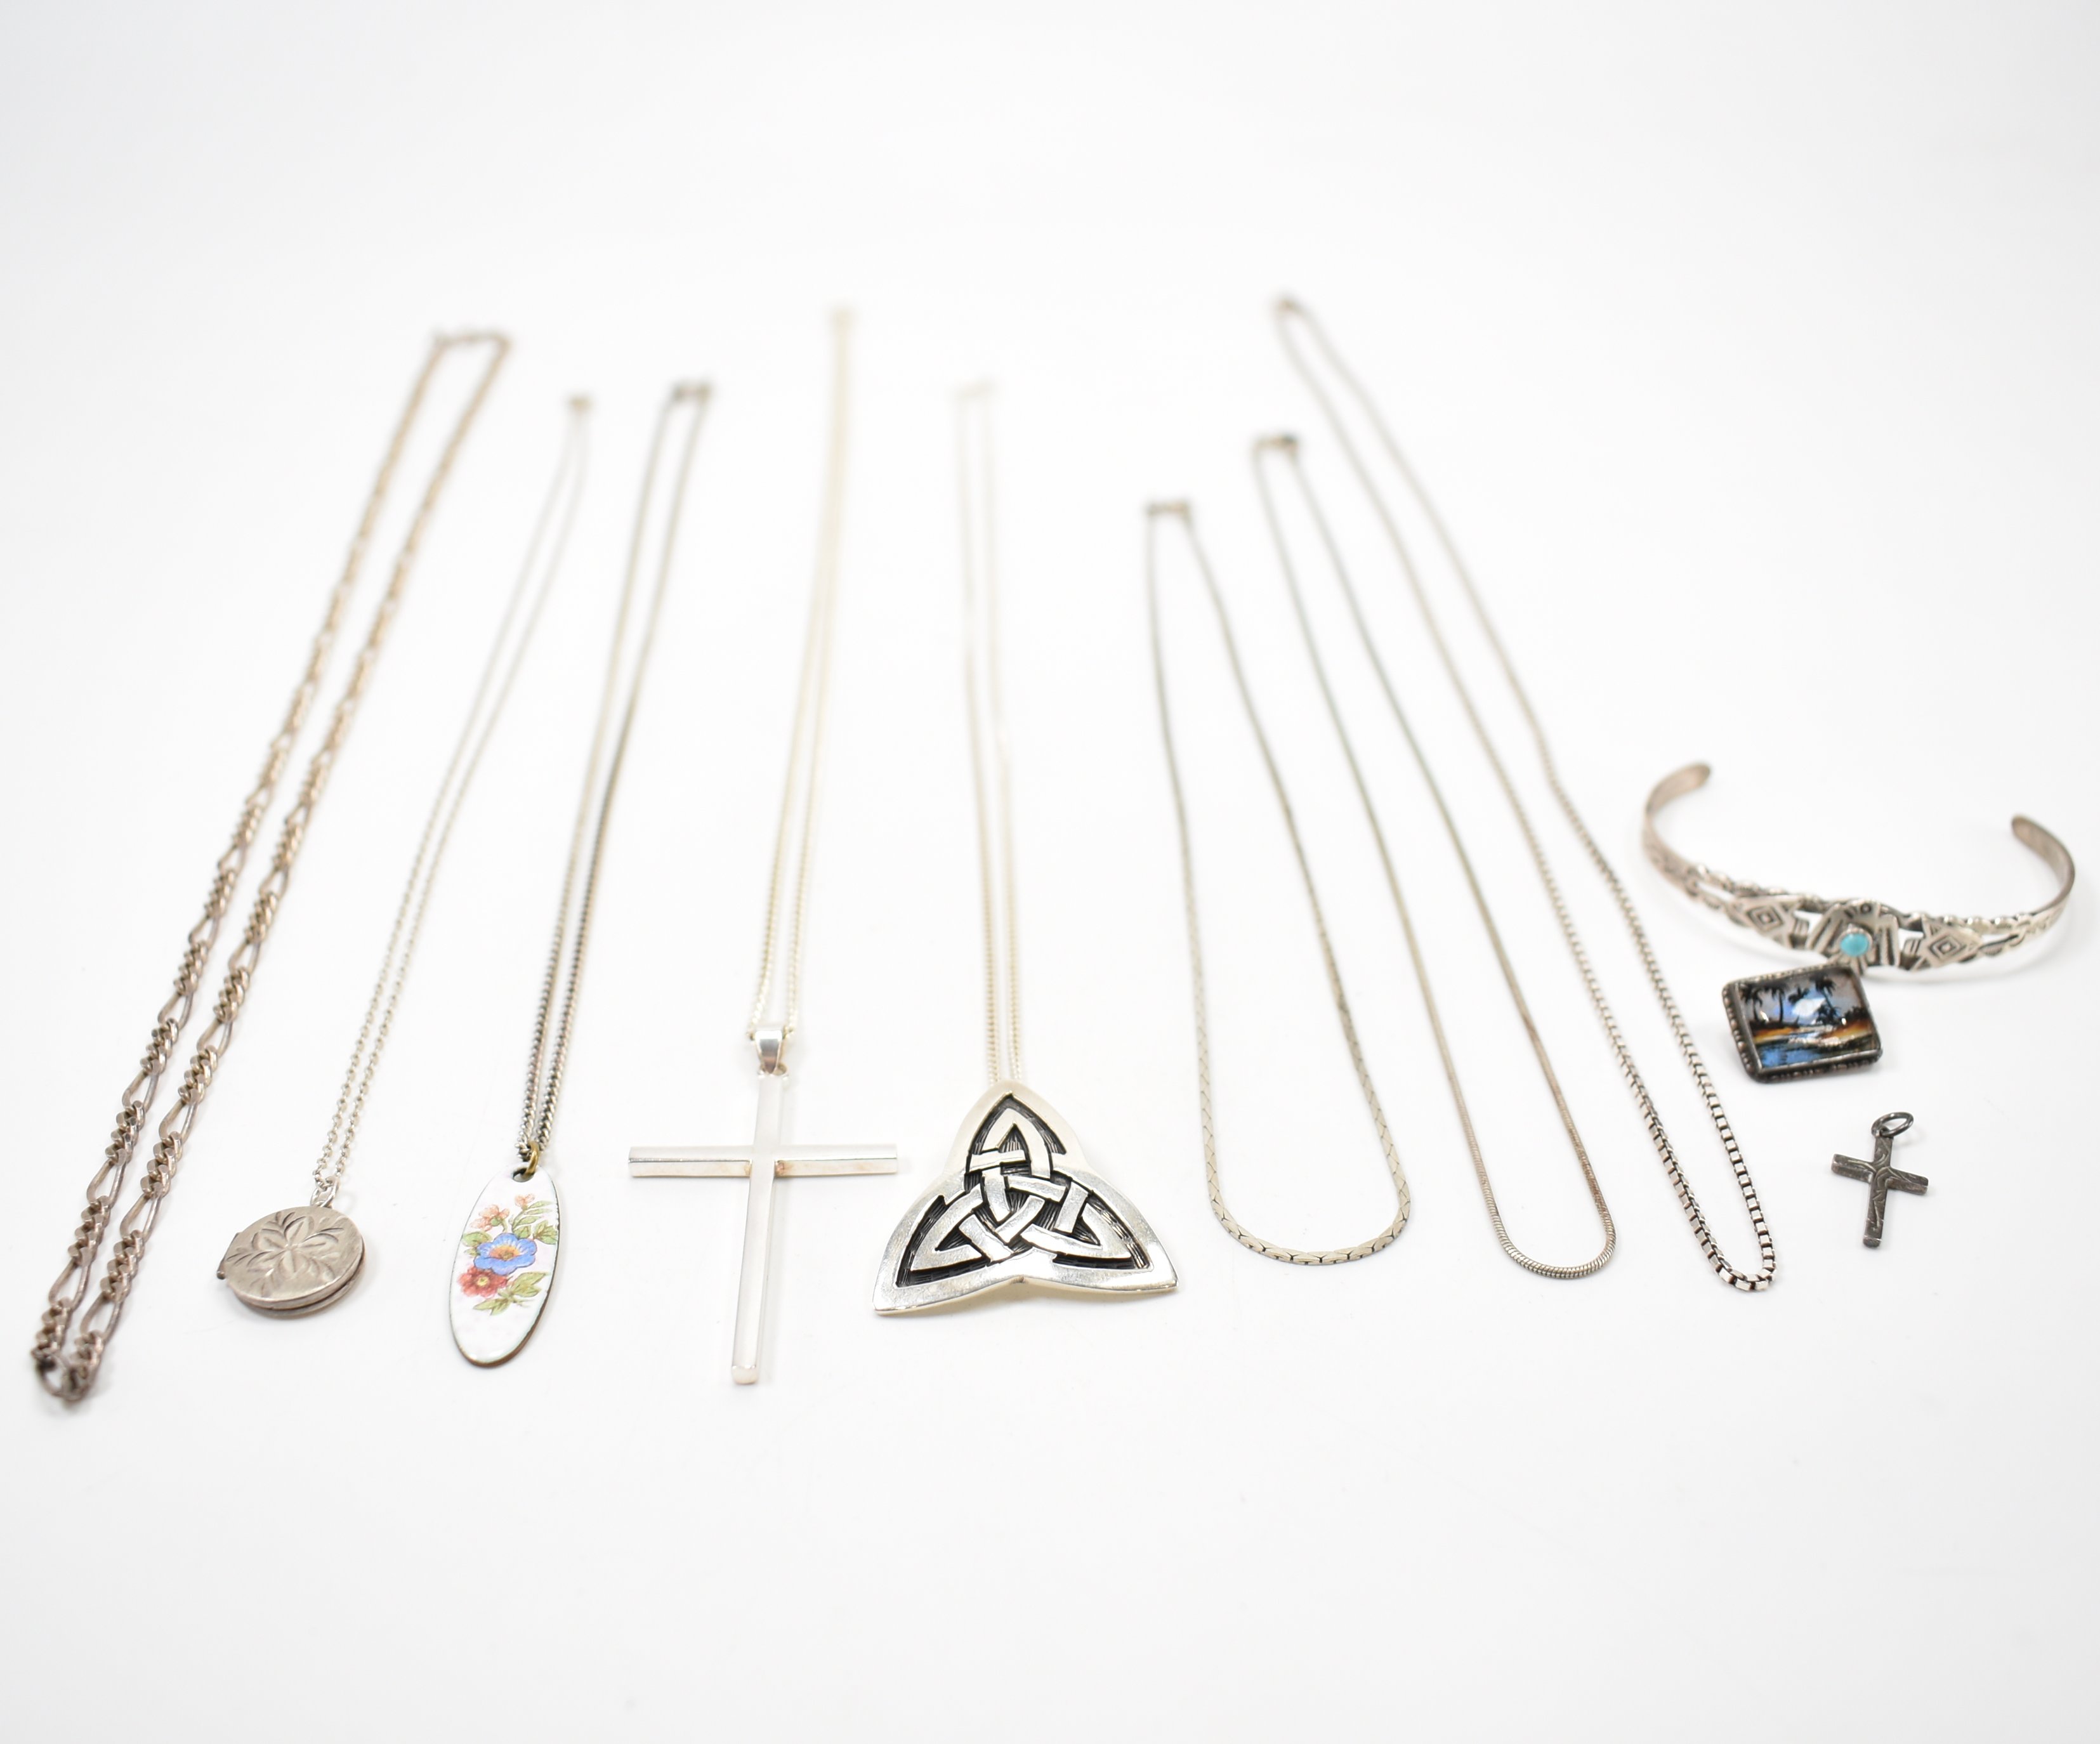 ASSORTMENT OF SILVER JEWELLERY - CHAINS, BROOCHES, PENDANTS